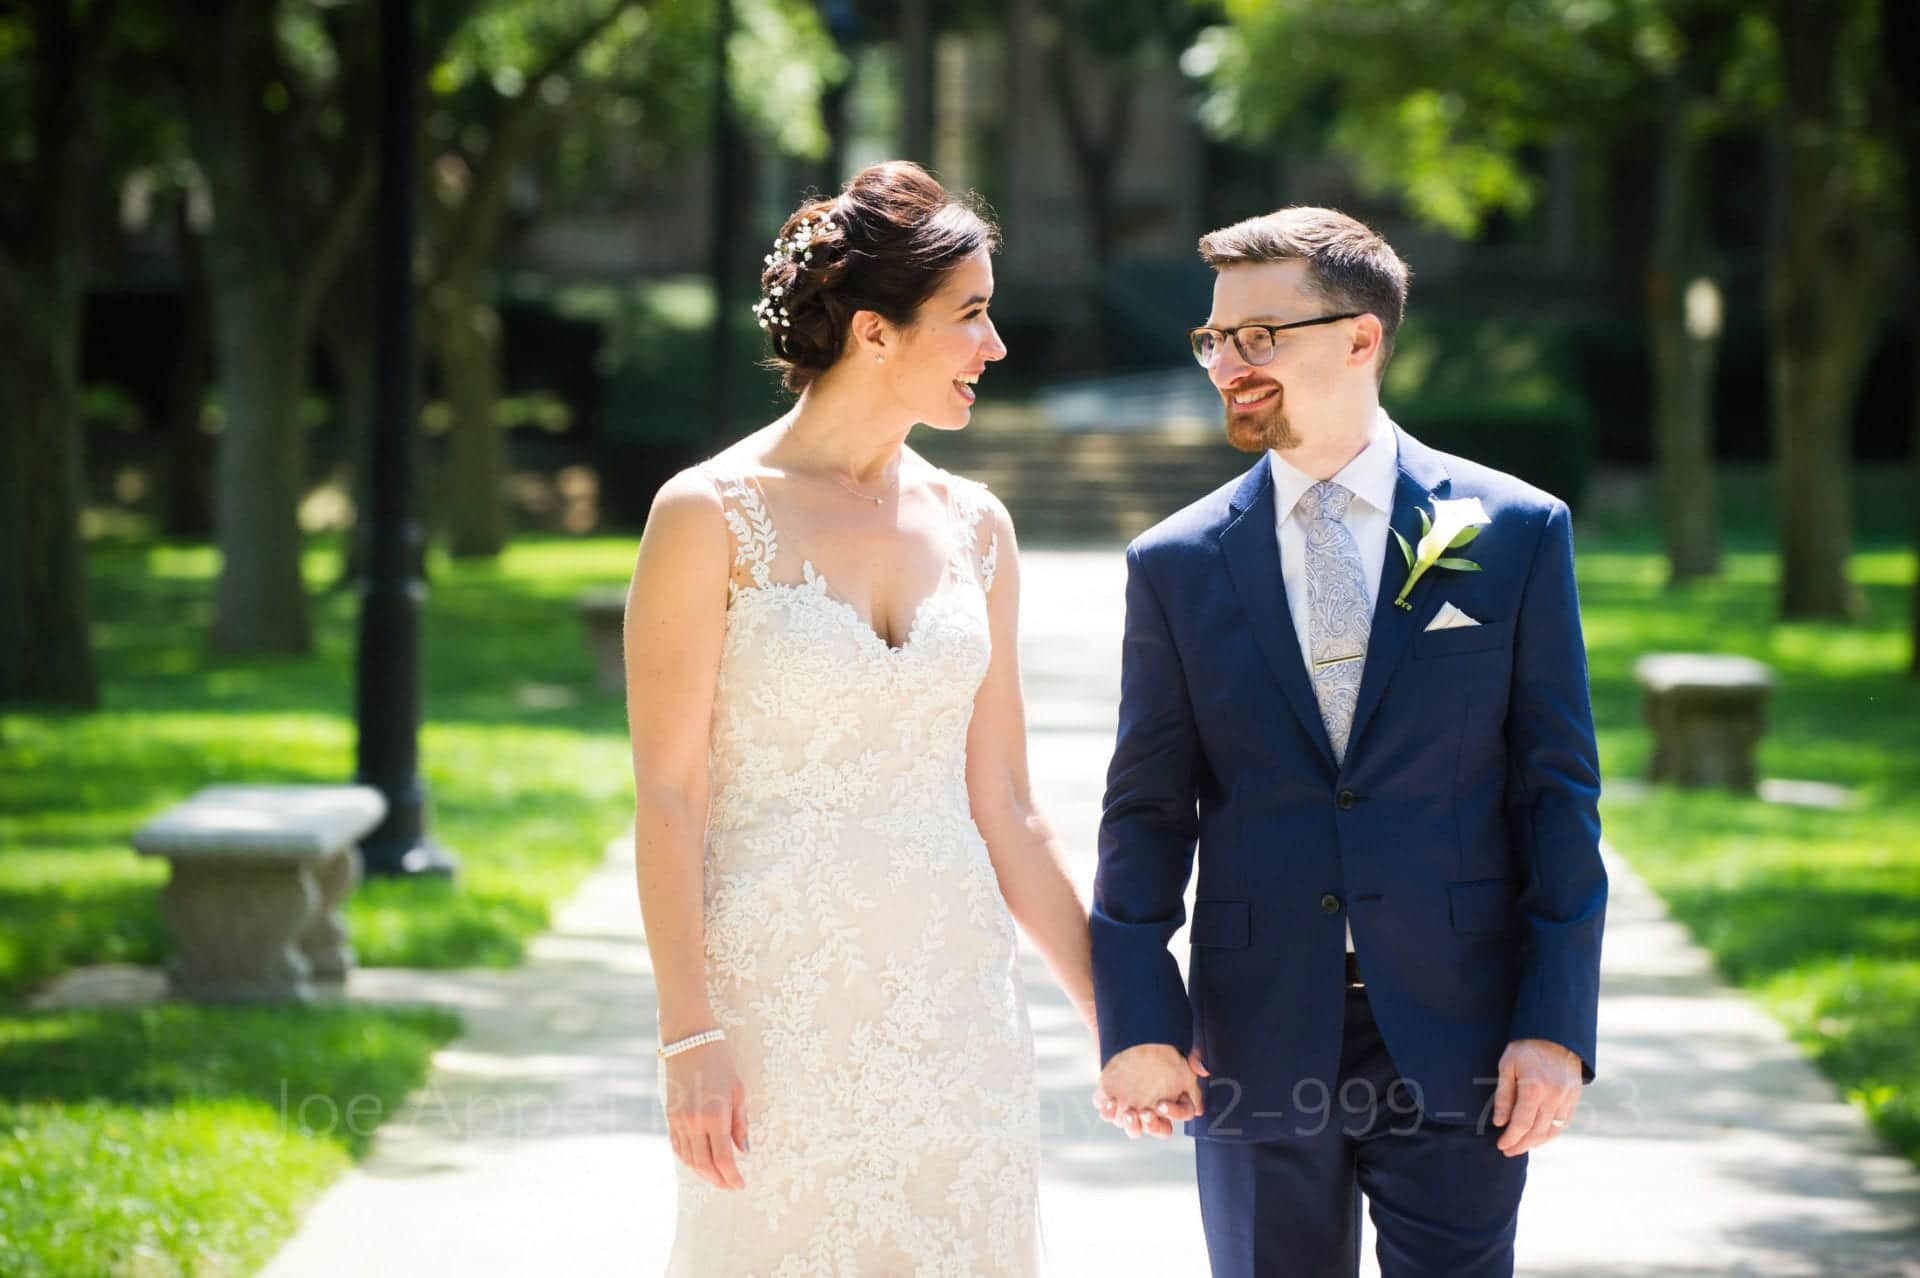 A bride and groom walk and hold hands on a flagstone pathway.